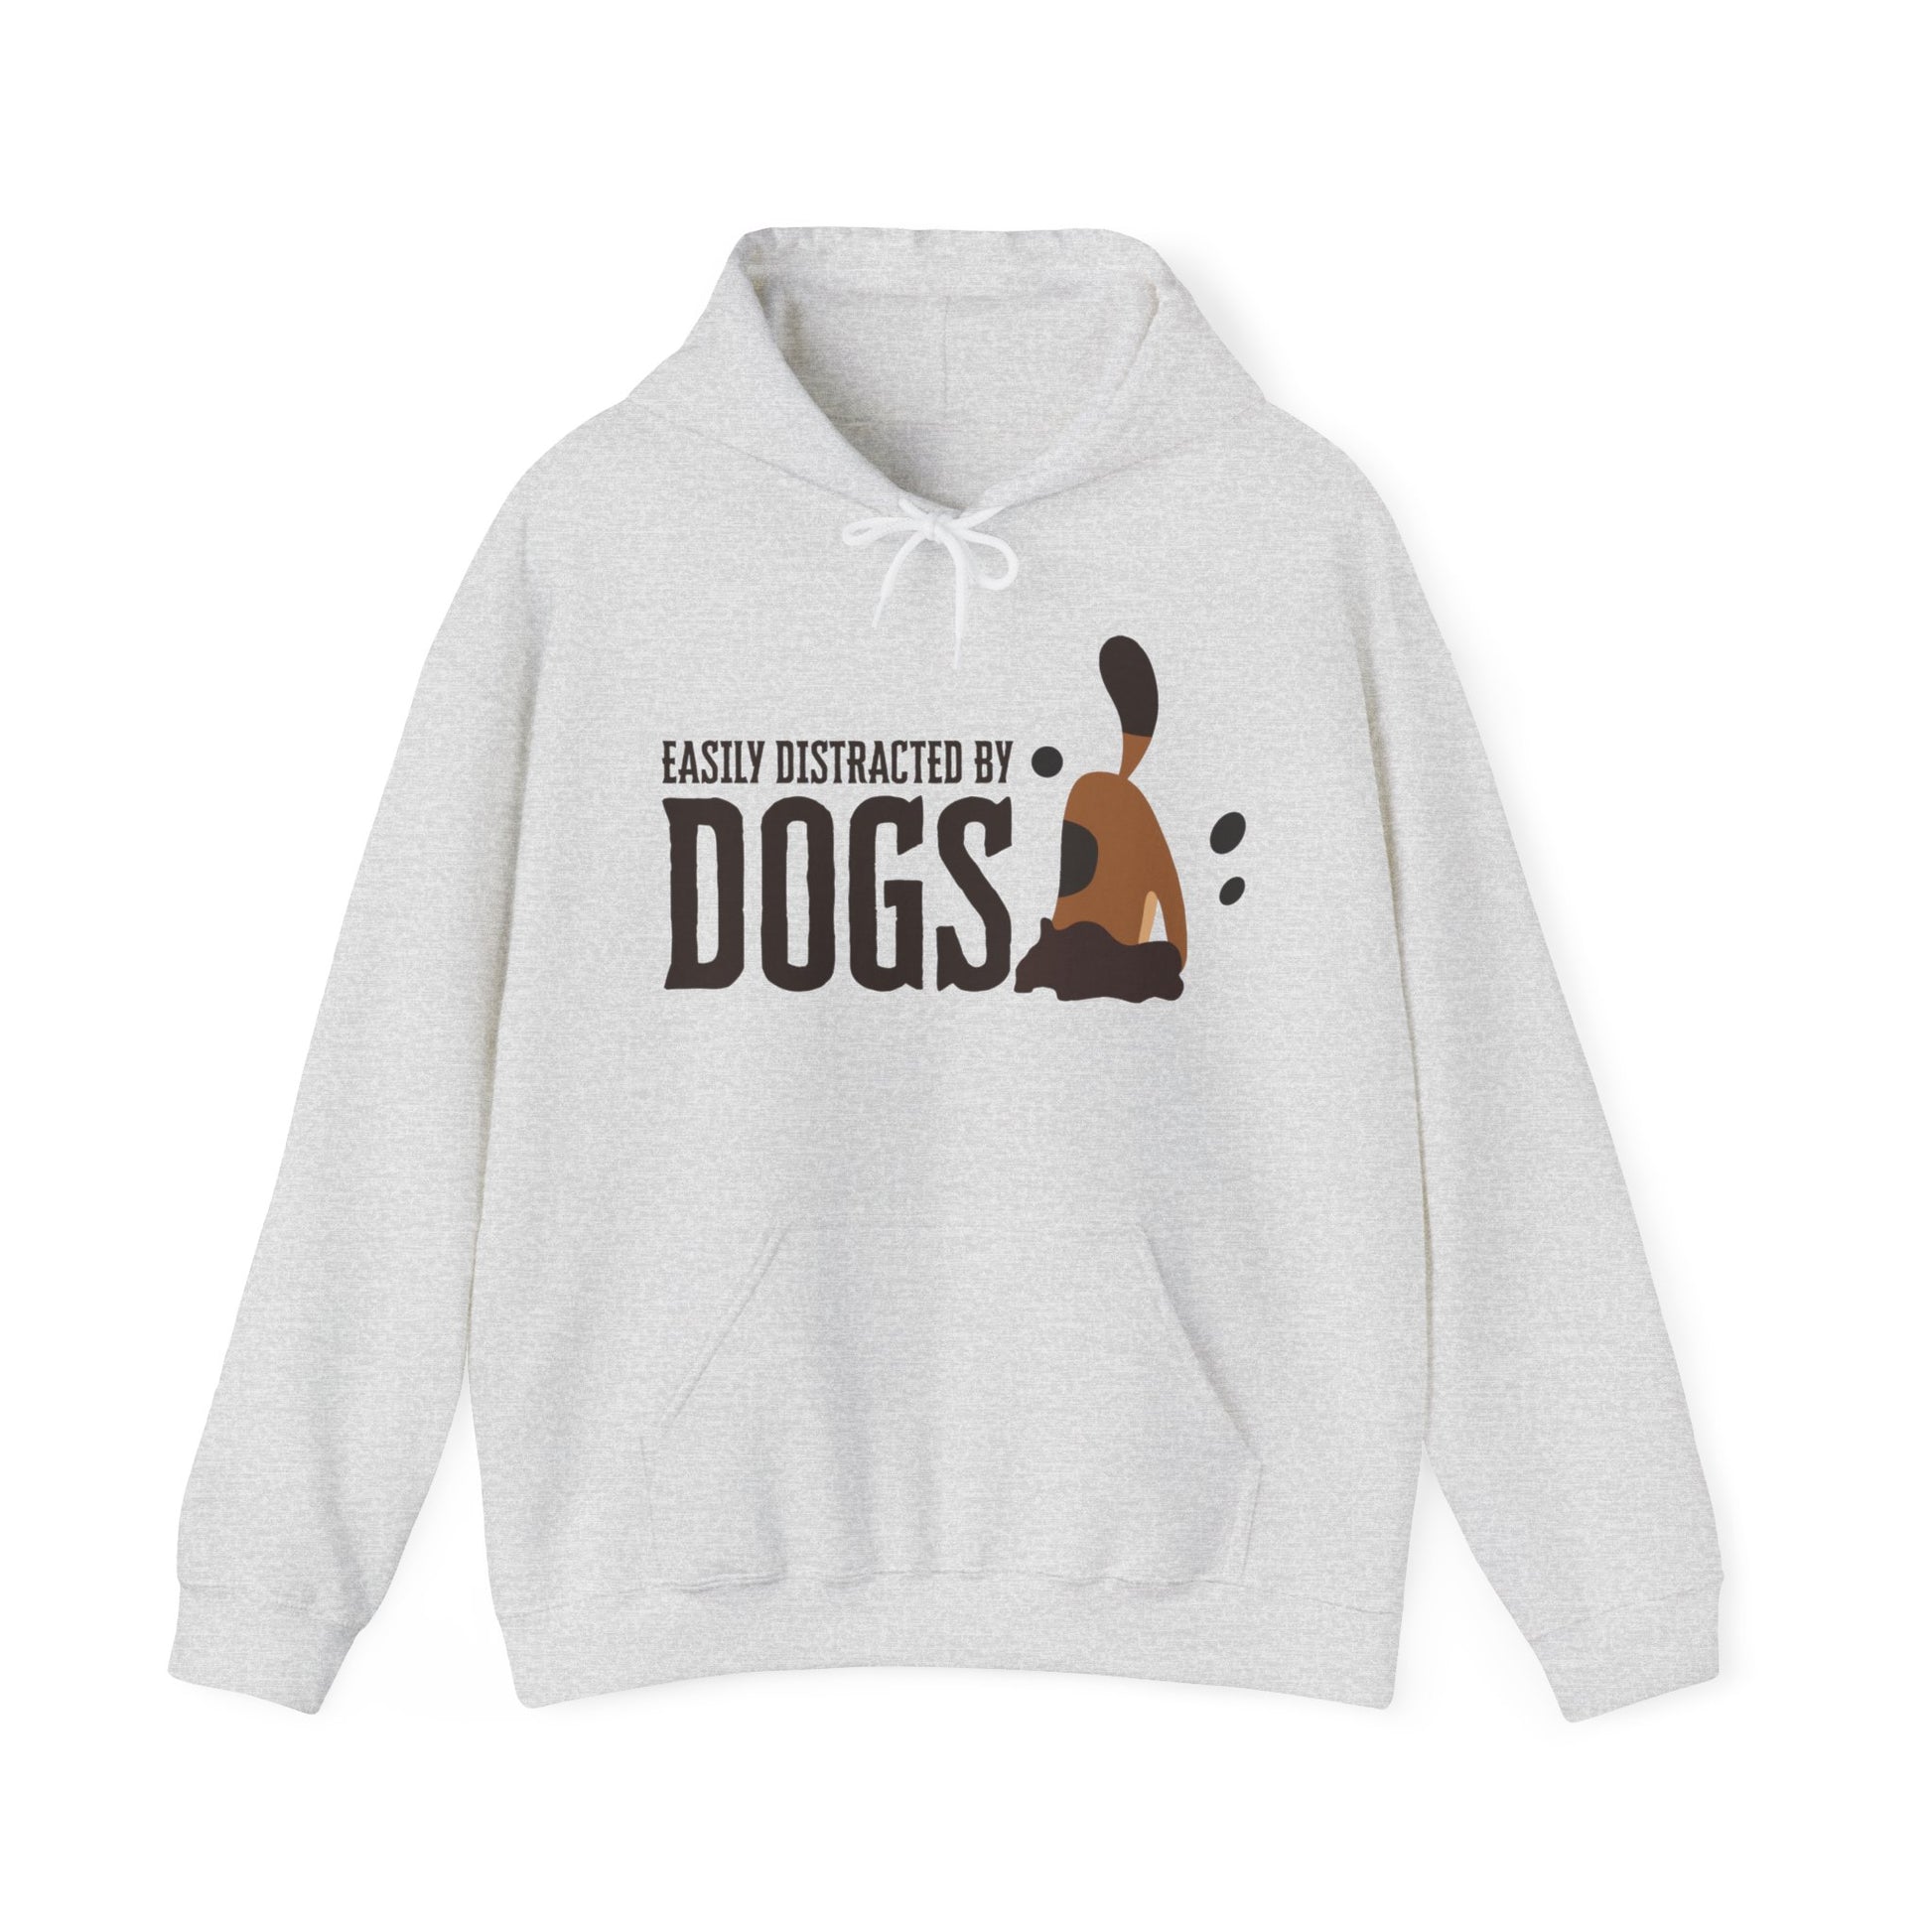 A ‘Dogs Pure Love, Dog Dig’ unisex ash colored hooded sweatshirt displays the slogan ‘Easily Distracted by Dogs,’ with a dog digging graphic, against a white backdrop.